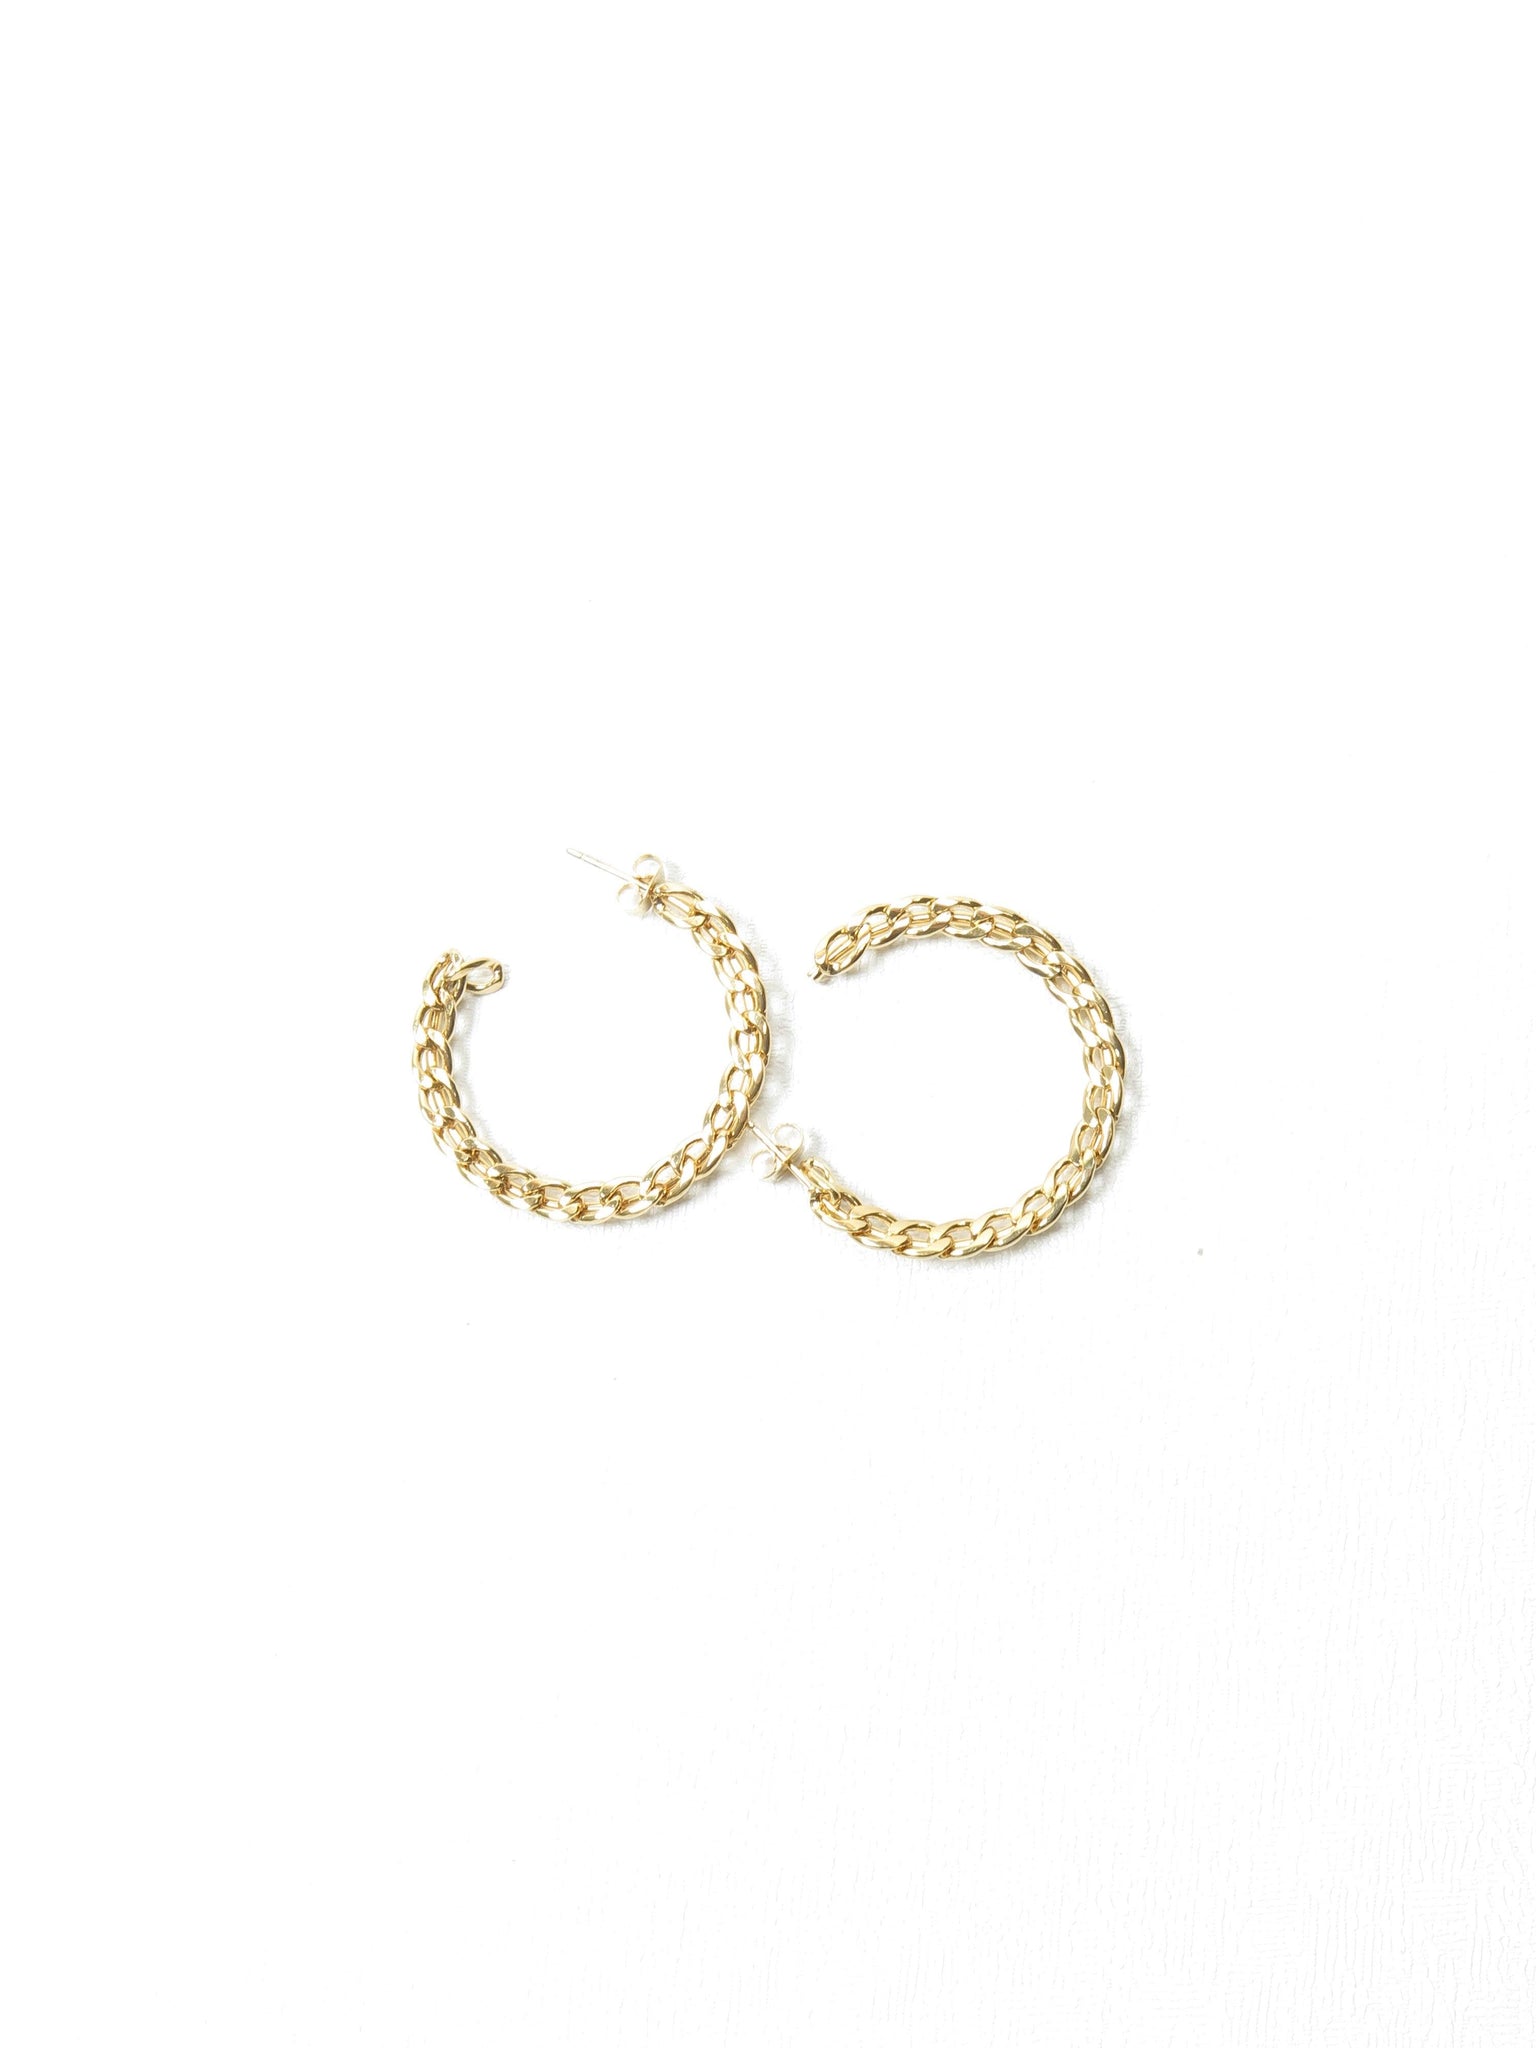 Gold Coloured Hoop Chain Style Earrings - The Harlequin